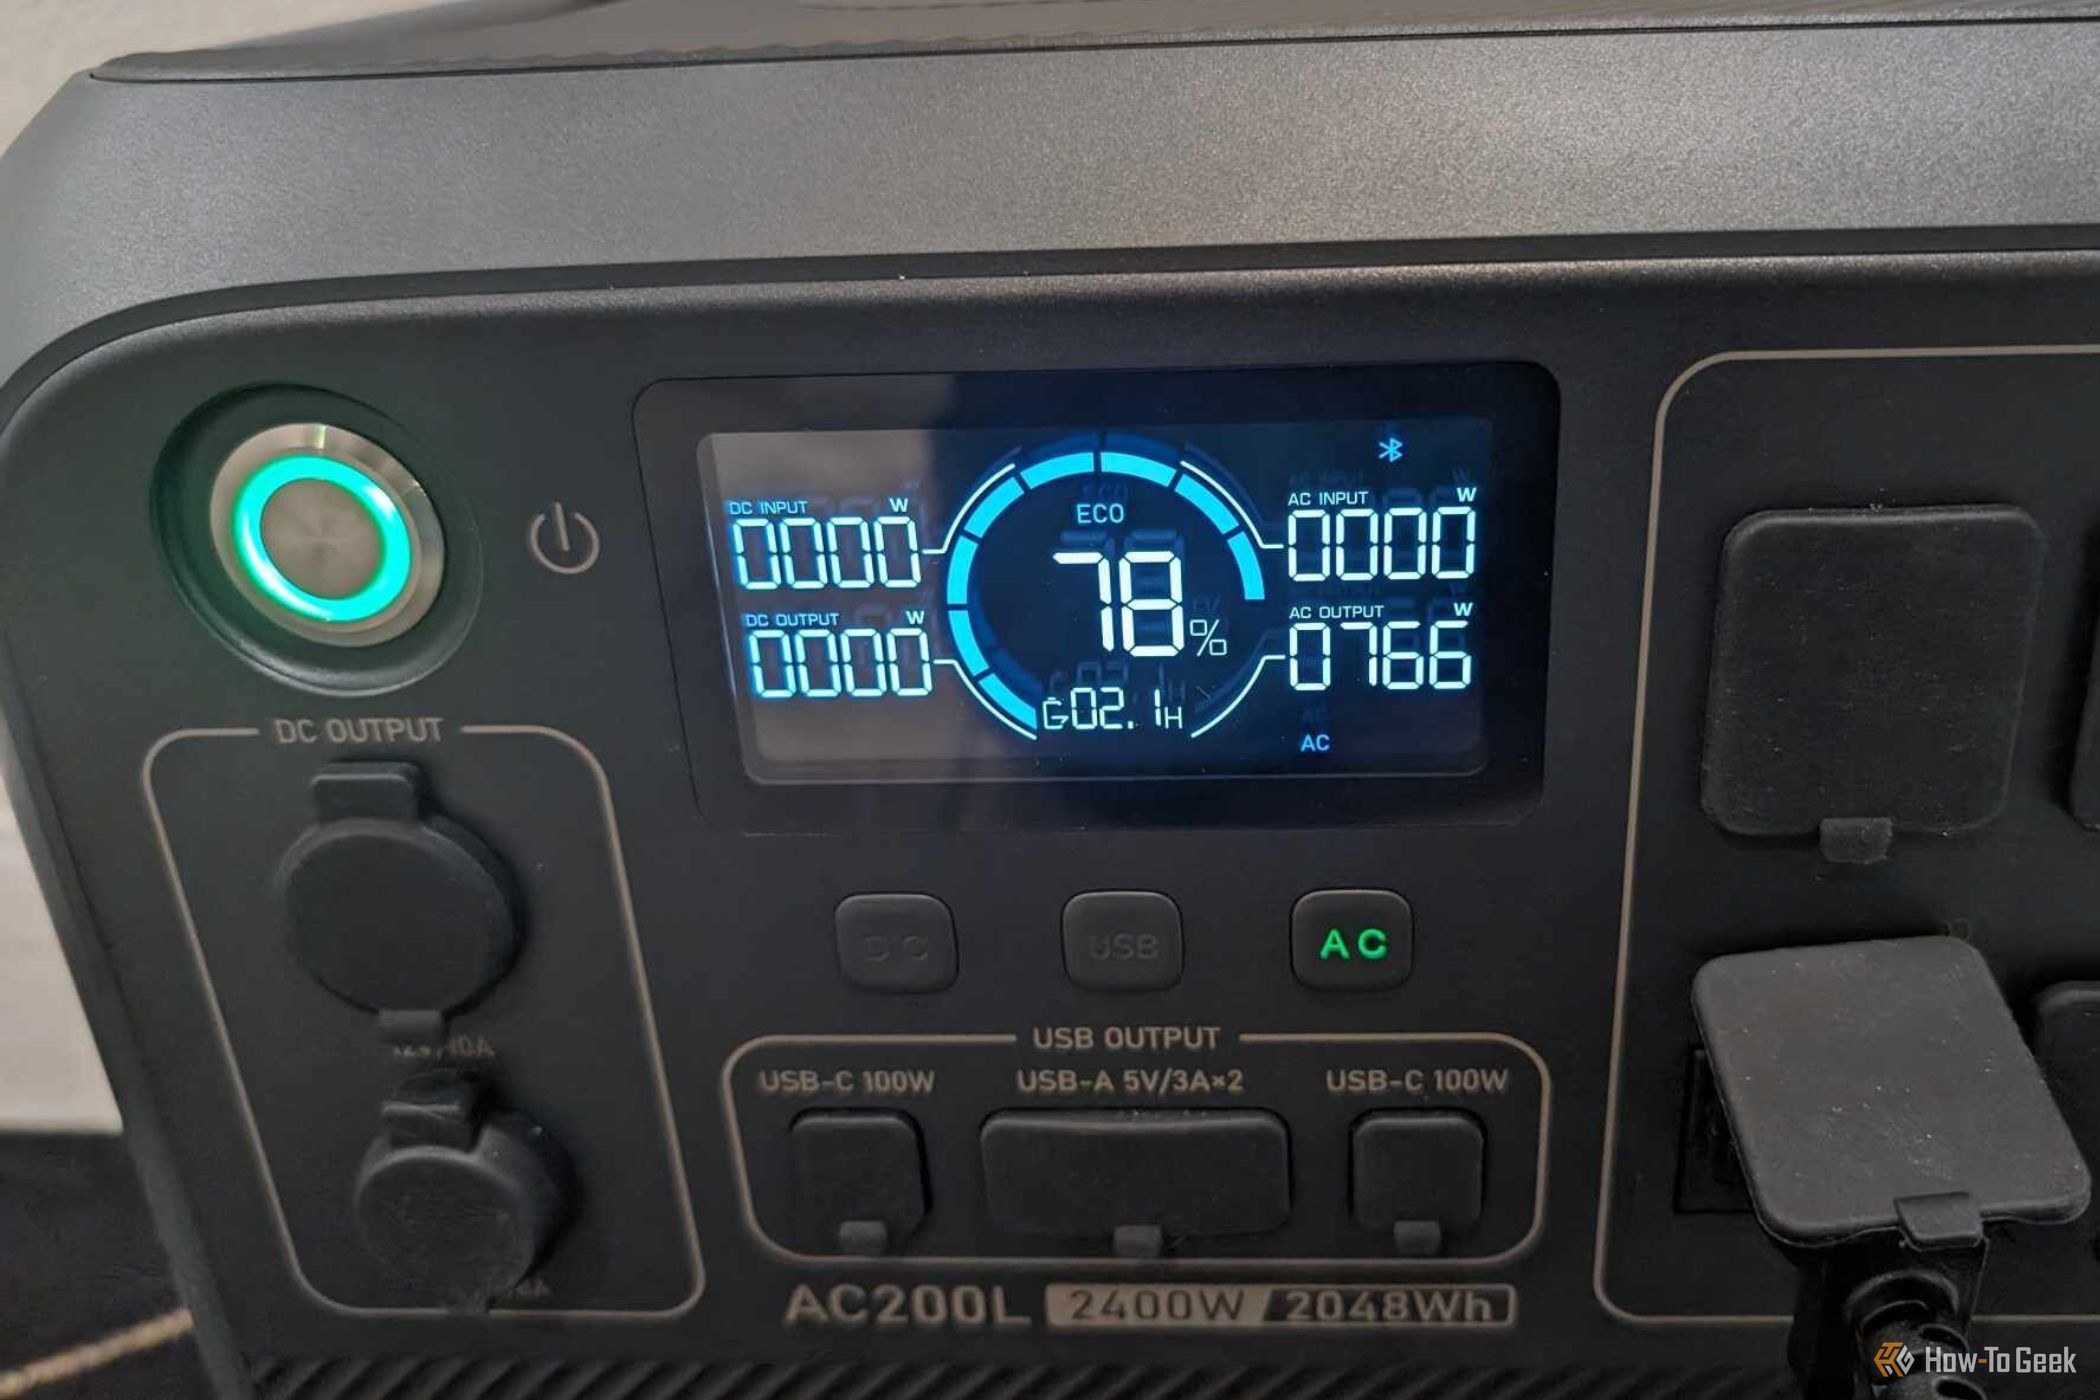 Bluetti AC200L Power Station showing 78% battery and 766W AC output